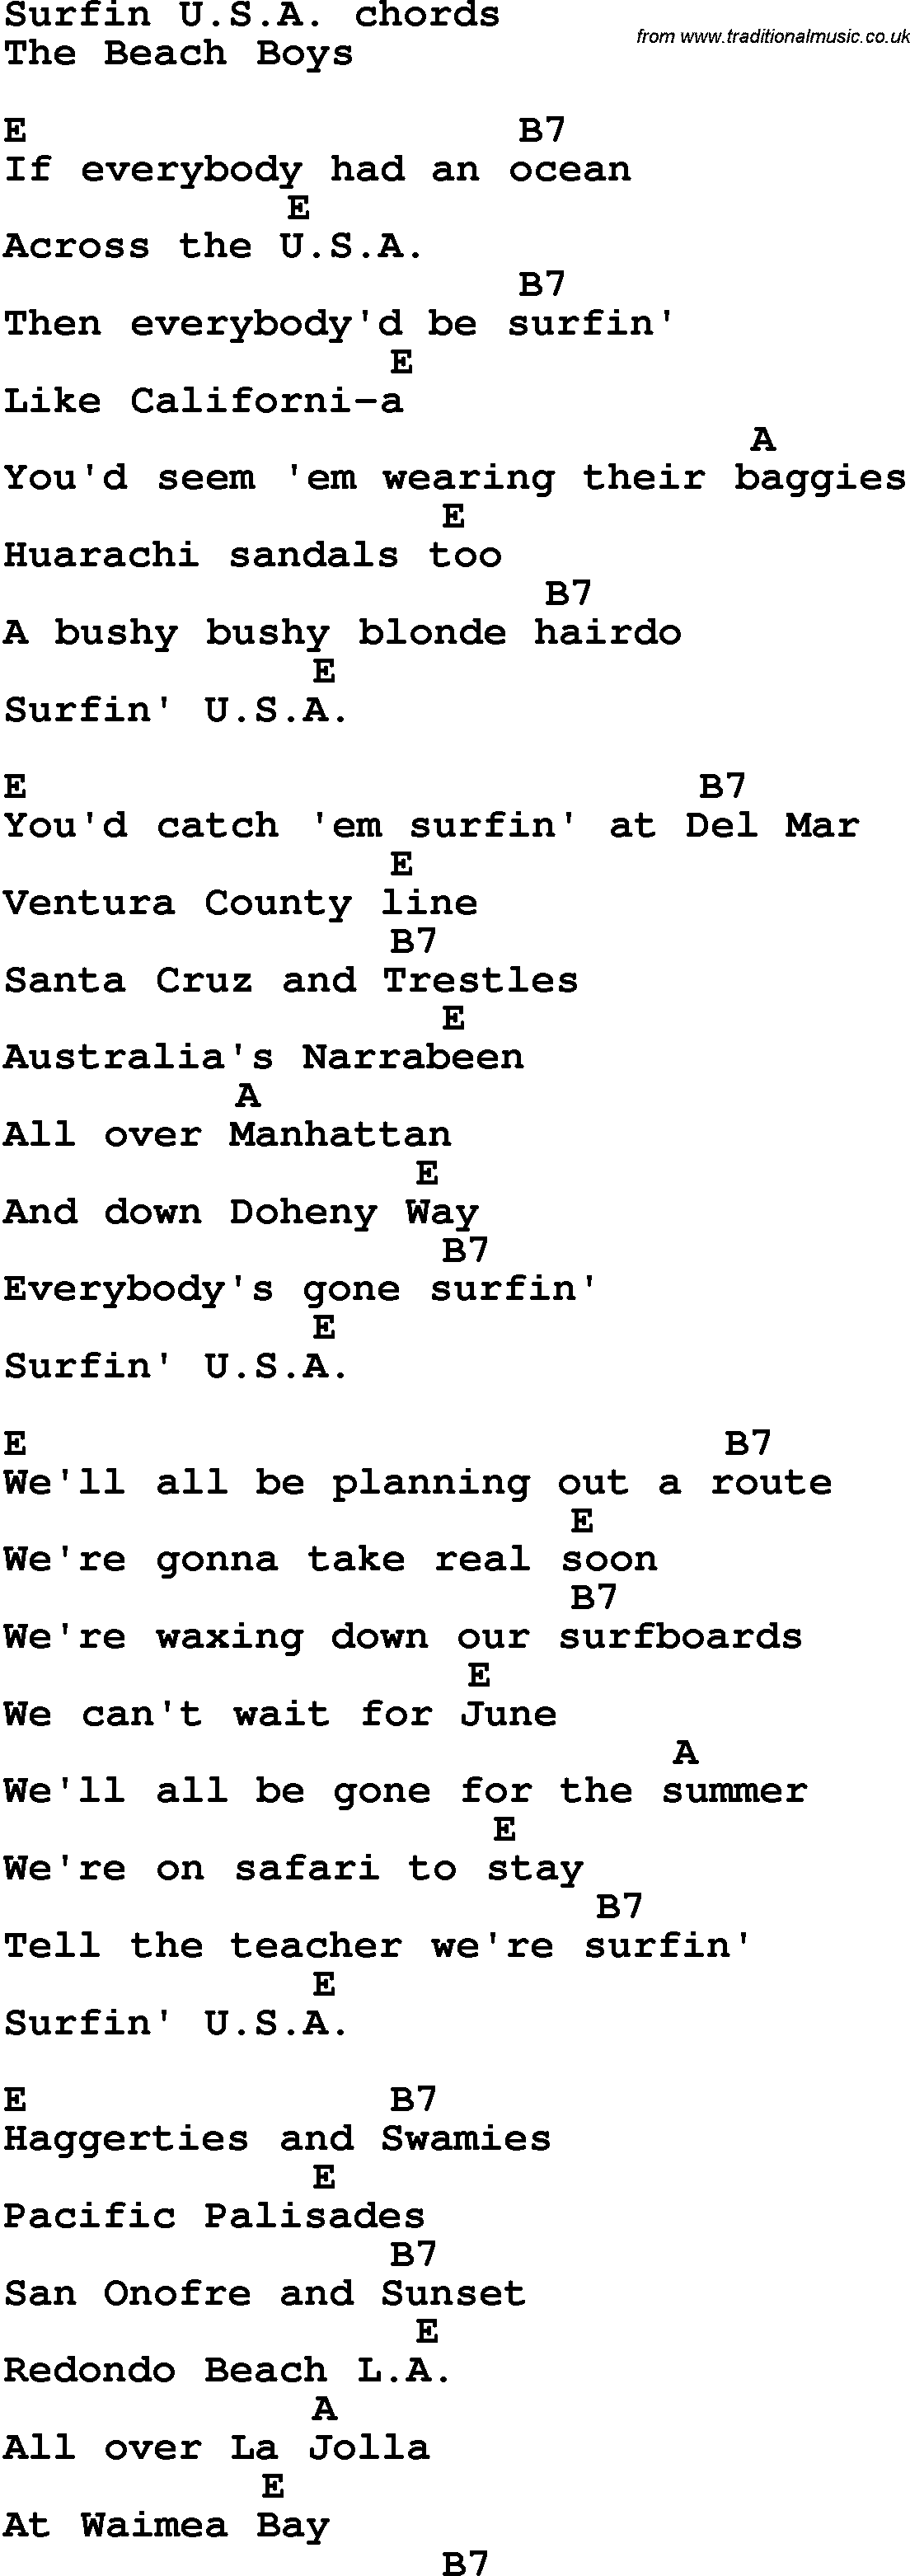 Song Lyrics with guitar chords for Surfin USA